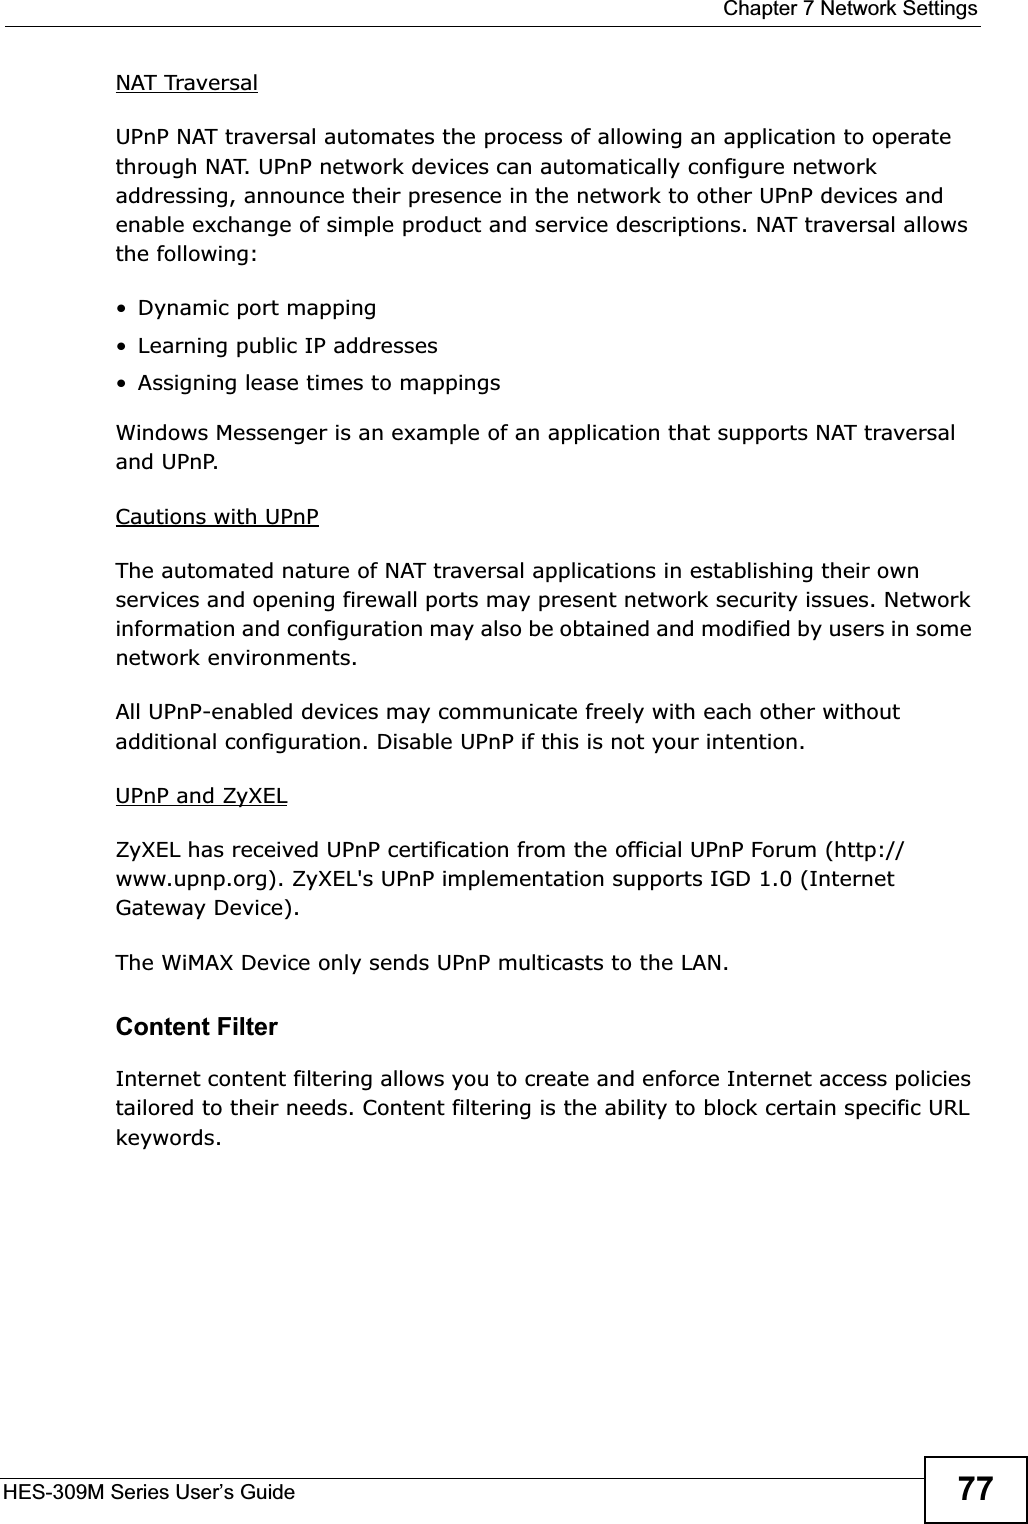  Chapter 7 Network SettingsHES-309M Series User’s Guide 77NAT TraversalUPnP NAT traversal automates the process of allowing an application to operate through NAT. UPnP network devices can automatically configure network addressing, announce their presence in the network to other UPnP devices and enable exchange of simple product and service descriptions. NAT traversal allows the following:• Dynamic port mapping• Learning public IP addresses• Assigning lease times to mappingsWindows Messenger is an example of an application that supports NAT traversal and UPnP. Cautions with UPnPThe automated nature of NAT traversal applications in establishing their own services and opening firewall ports may present network security issues. Network information and configuration may also be obtained and modified by users in some network environments. All UPnP-enabled devices may communicate freely with each other without additional configuration. Disable UPnP if this is not your intention. UPnP and ZyXELZyXEL has received UPnP certification from the official UPnP Forum (http://www.upnp.org). ZyXEL&apos;s UPnP implementation supports IGD 1.0 (Internet Gateway Device).The WiMAX Device only sends UPnP multicasts to the LAN.Content FilterInternet content filtering allows you to create and enforce Internet access policies tailored to their needs. Content filtering is the ability to block certain specific URL keywords.